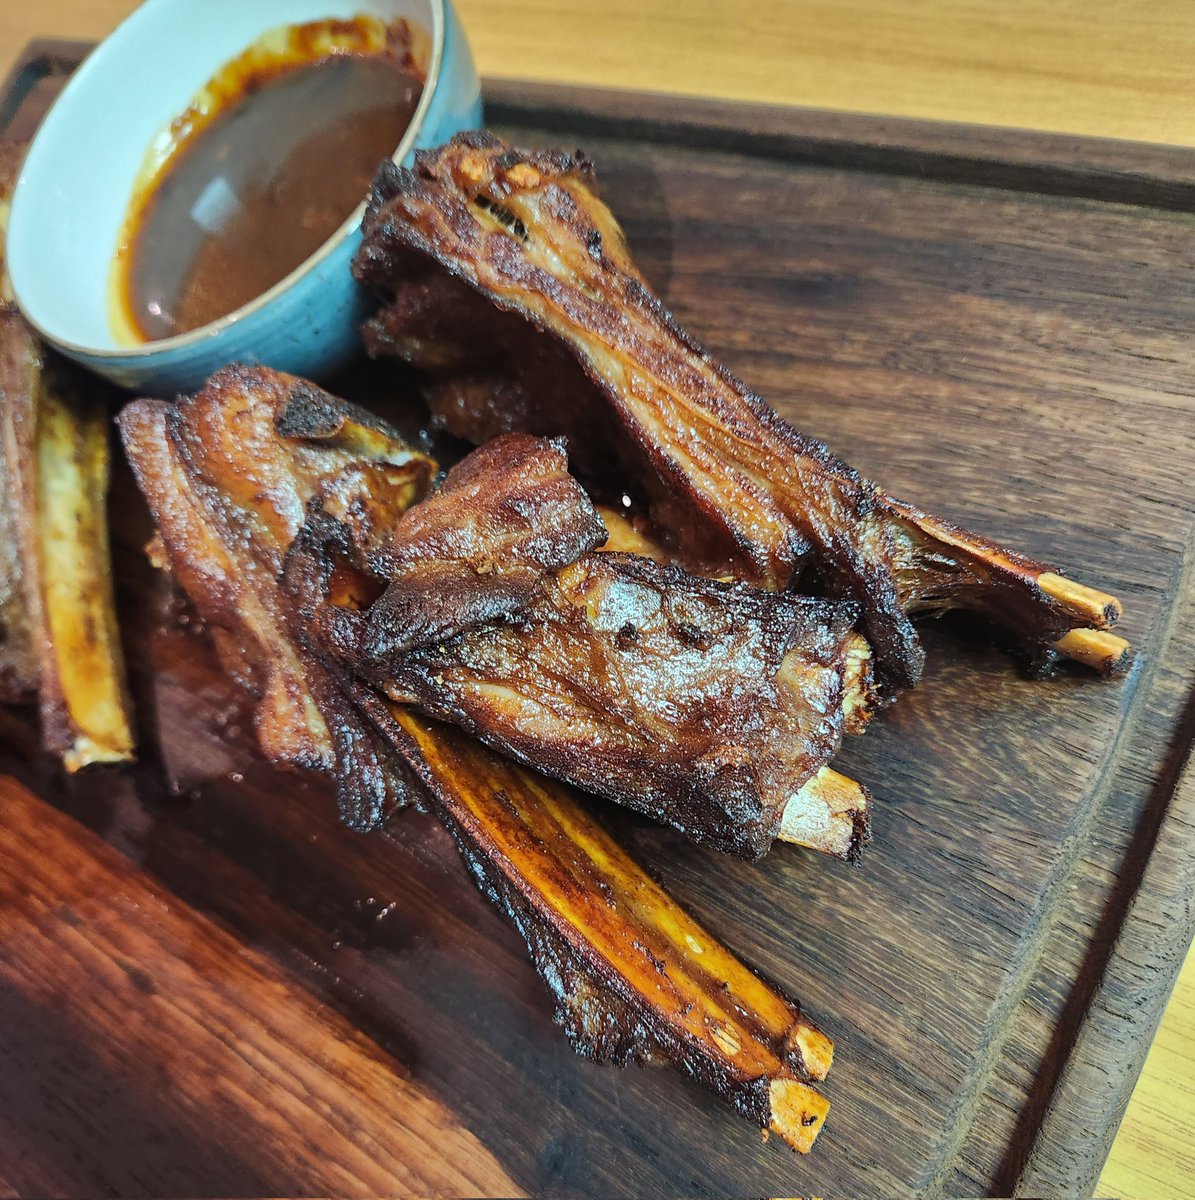 Those lamb ribs cooked to perfection & crisp just before serving are the ideal nibble on the San Deck with your favorite Cabernet Sauvignon 

#MiguelChan #Sommelier #Africa #Lamb #SandtonSun #Ribs #SanDeck #LambRibs #Sandton #CabernetSauvignon #SandtonCentral #SouthAfrica #Wine